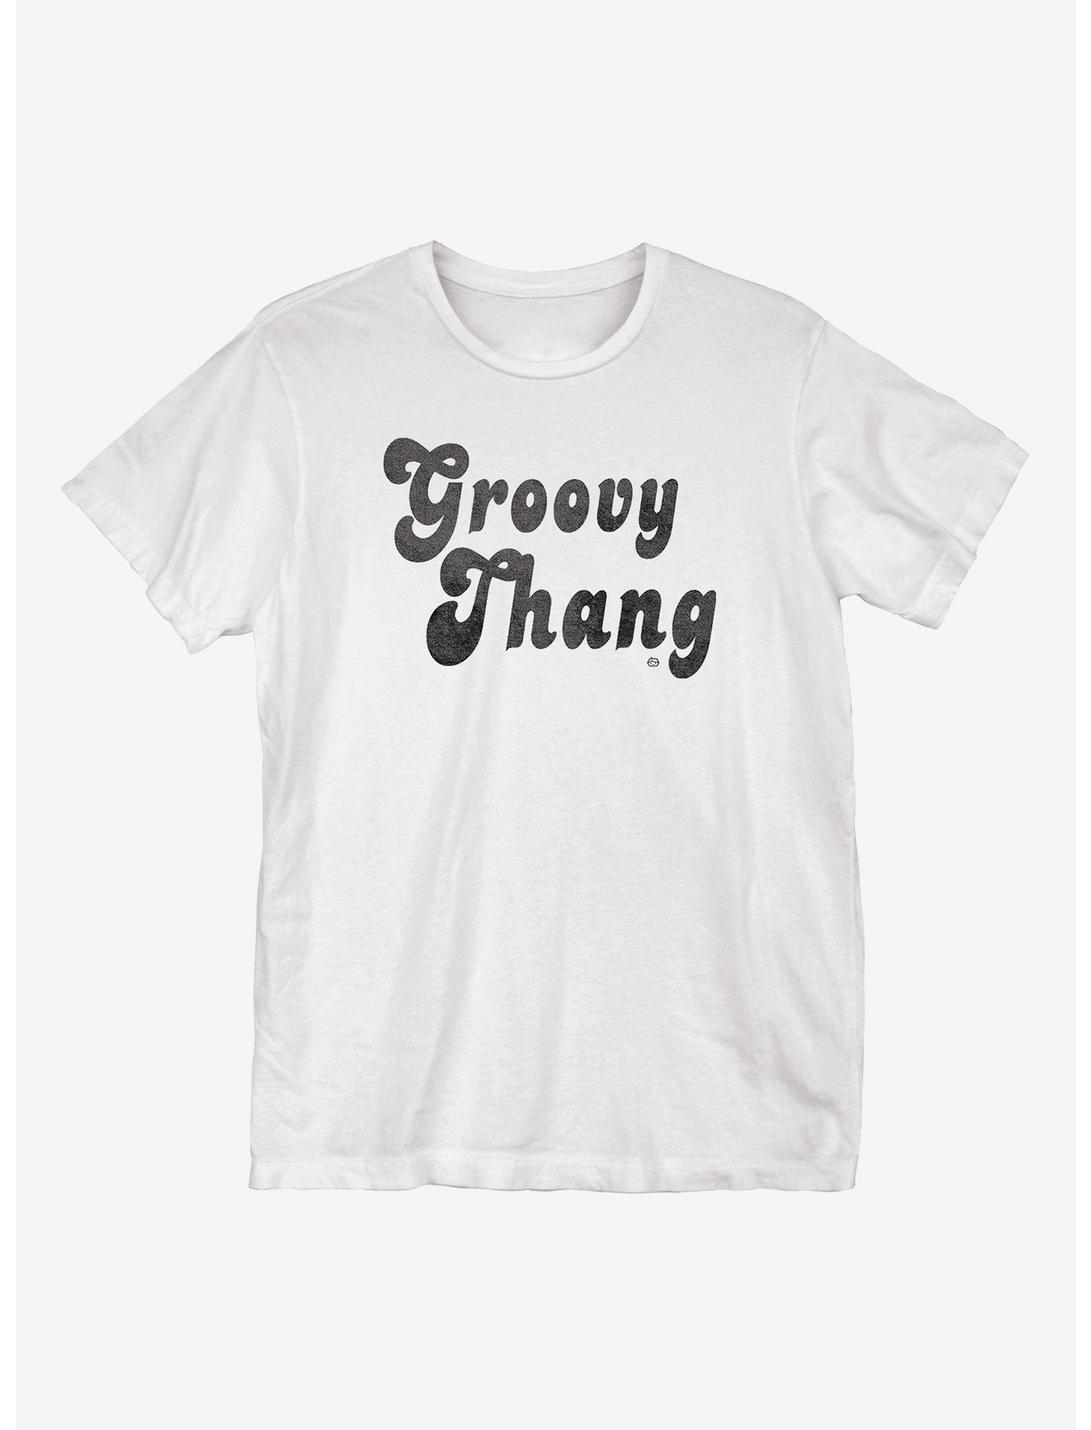 Groovy Thang T-Shirt, WHITE, hi-res